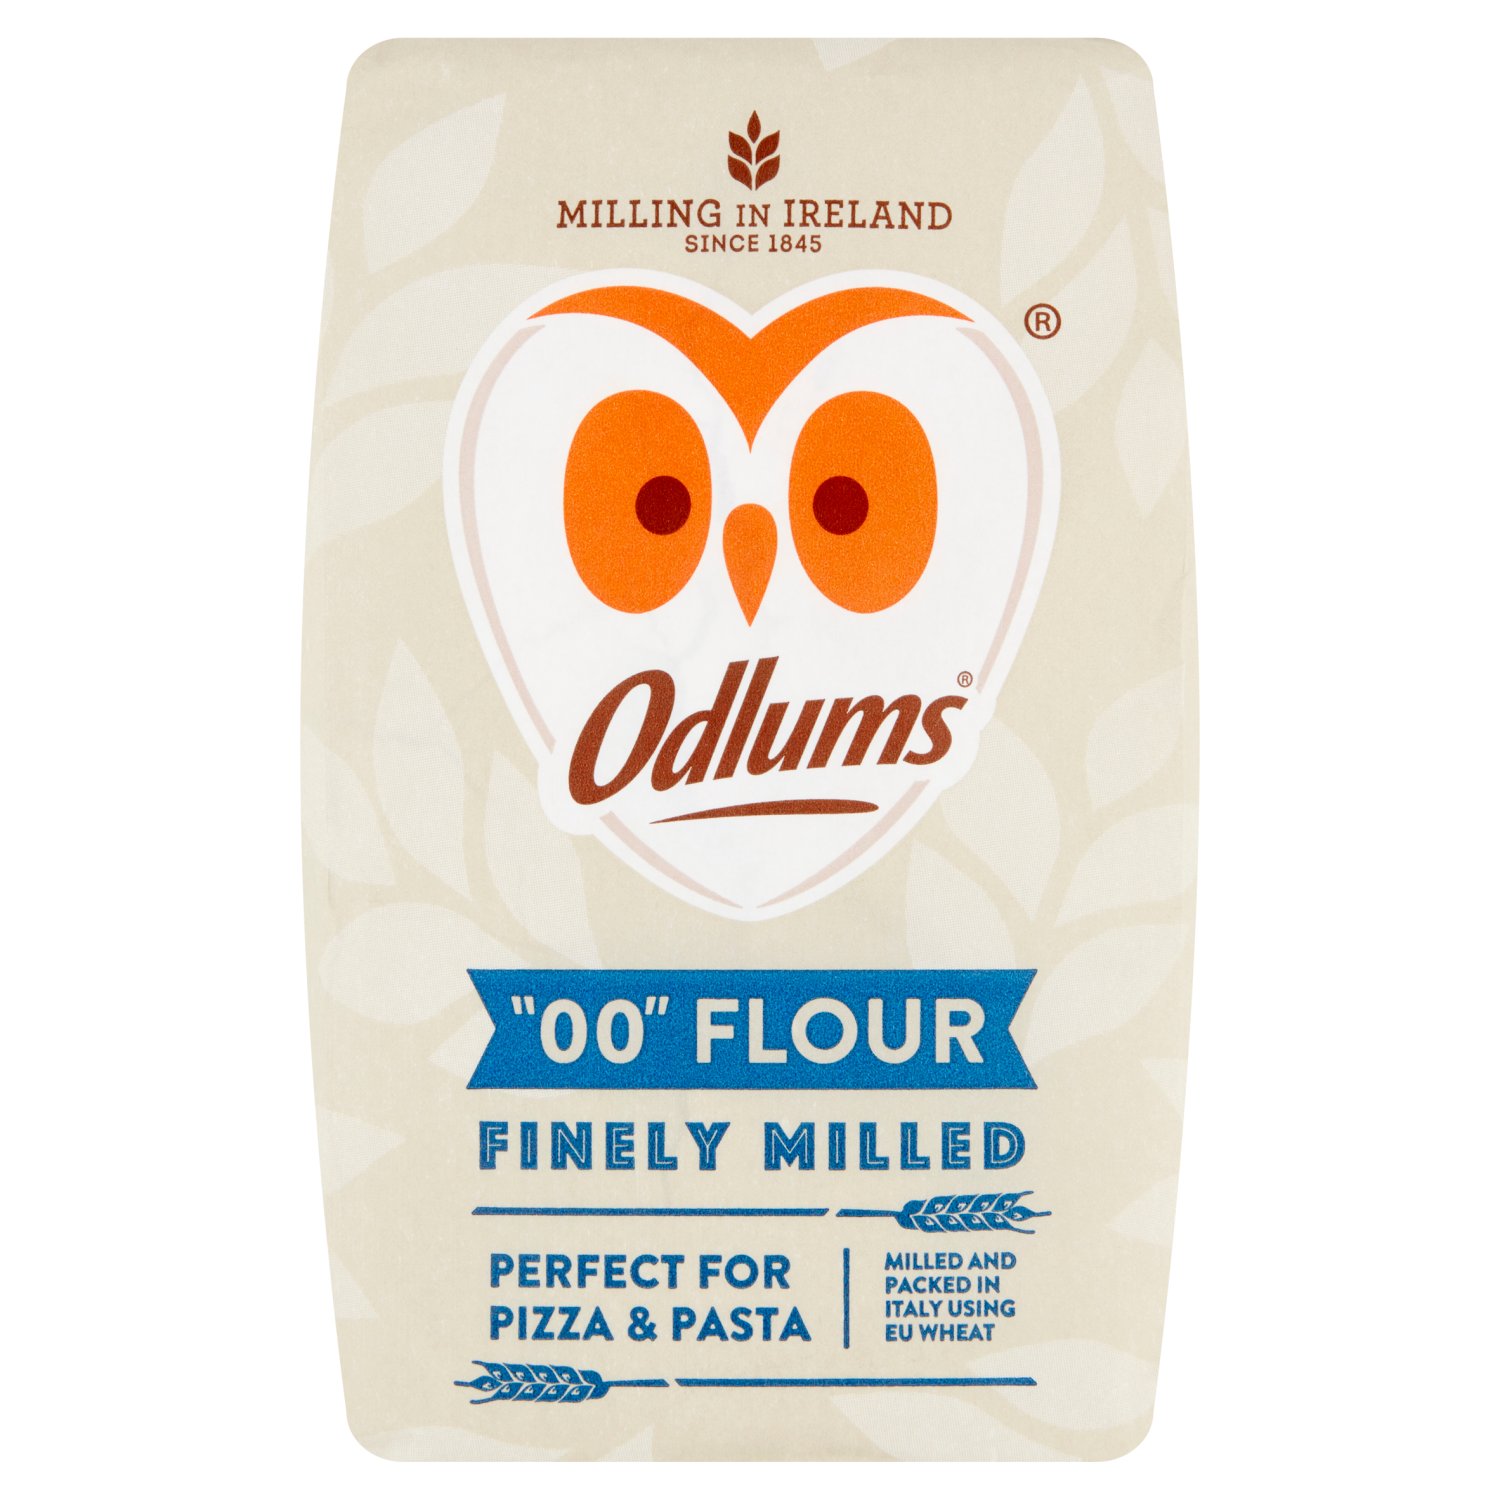 Milling in Ireland Since 1845
At Odlums we have been celebrating the joy of baking since 1845, when the Odlum family opened their first flour mill in Portlaoise.
Our "00" flour has been sourced directly from Italy so that you can make delicious pizzas and pasta for friends and family with authentic Italian flour.